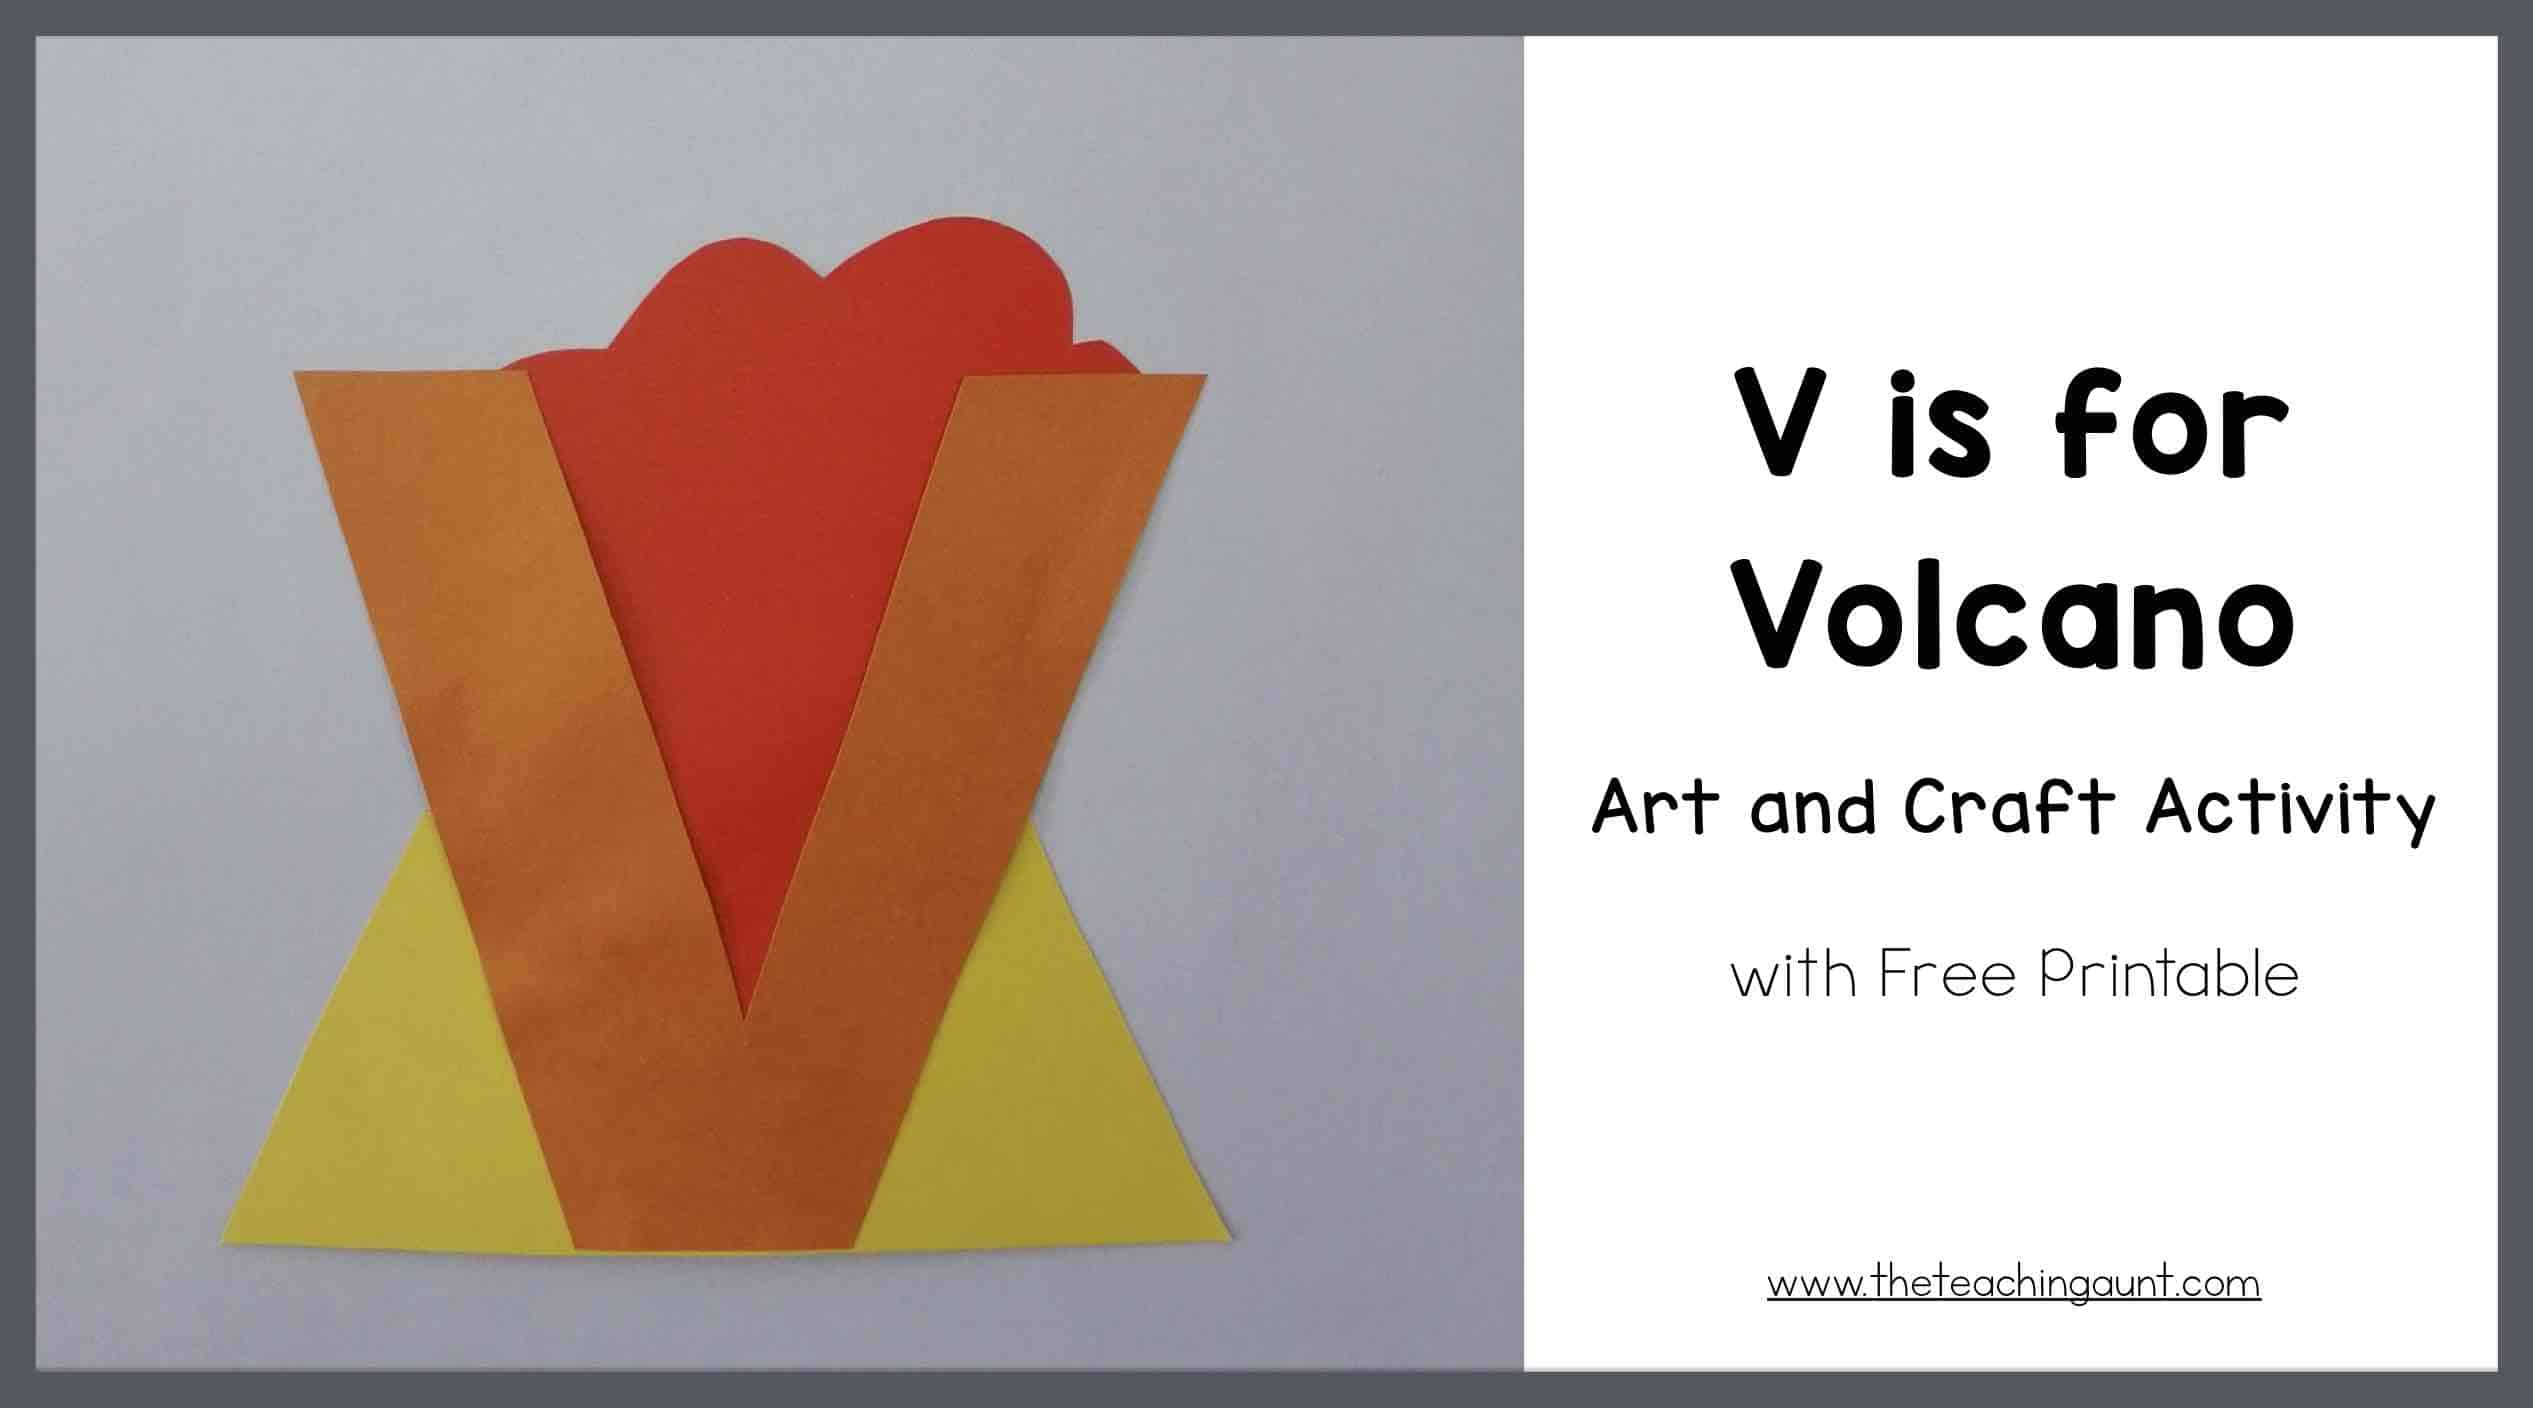 V is for Volcano Art and Craft